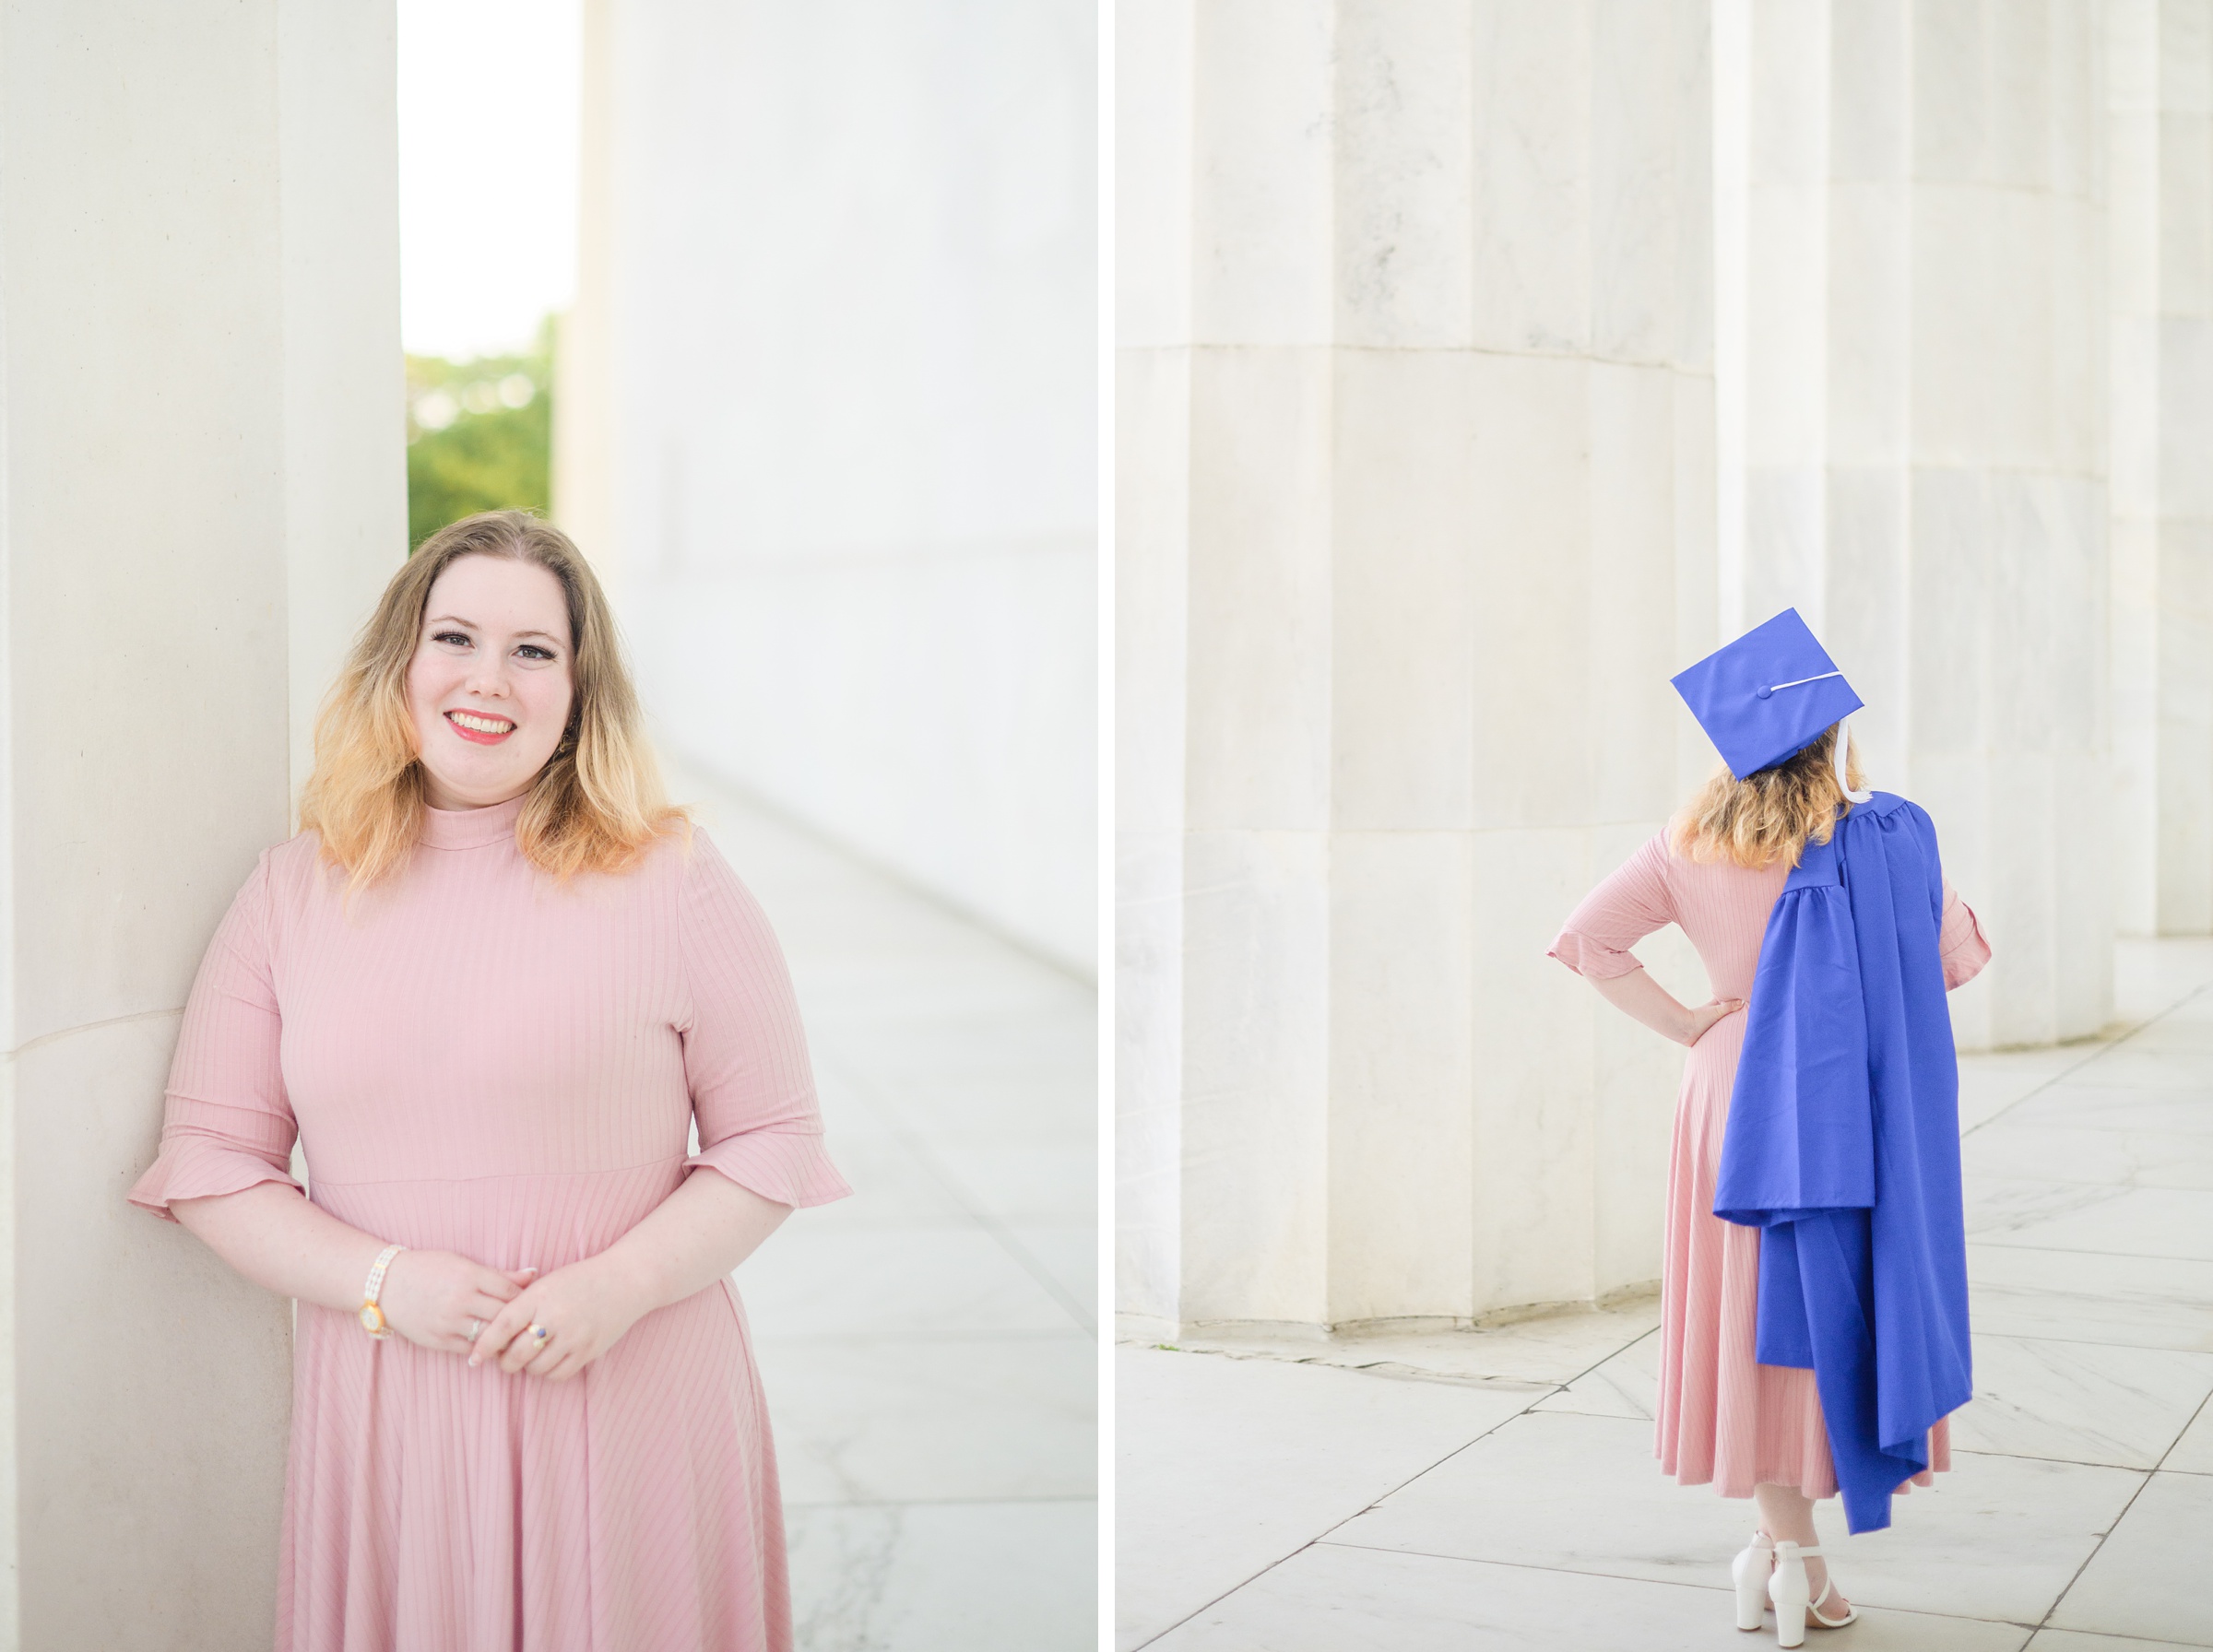 Senior Photos on the National Mall photographed by Baltimore Photographer Cait Kramer